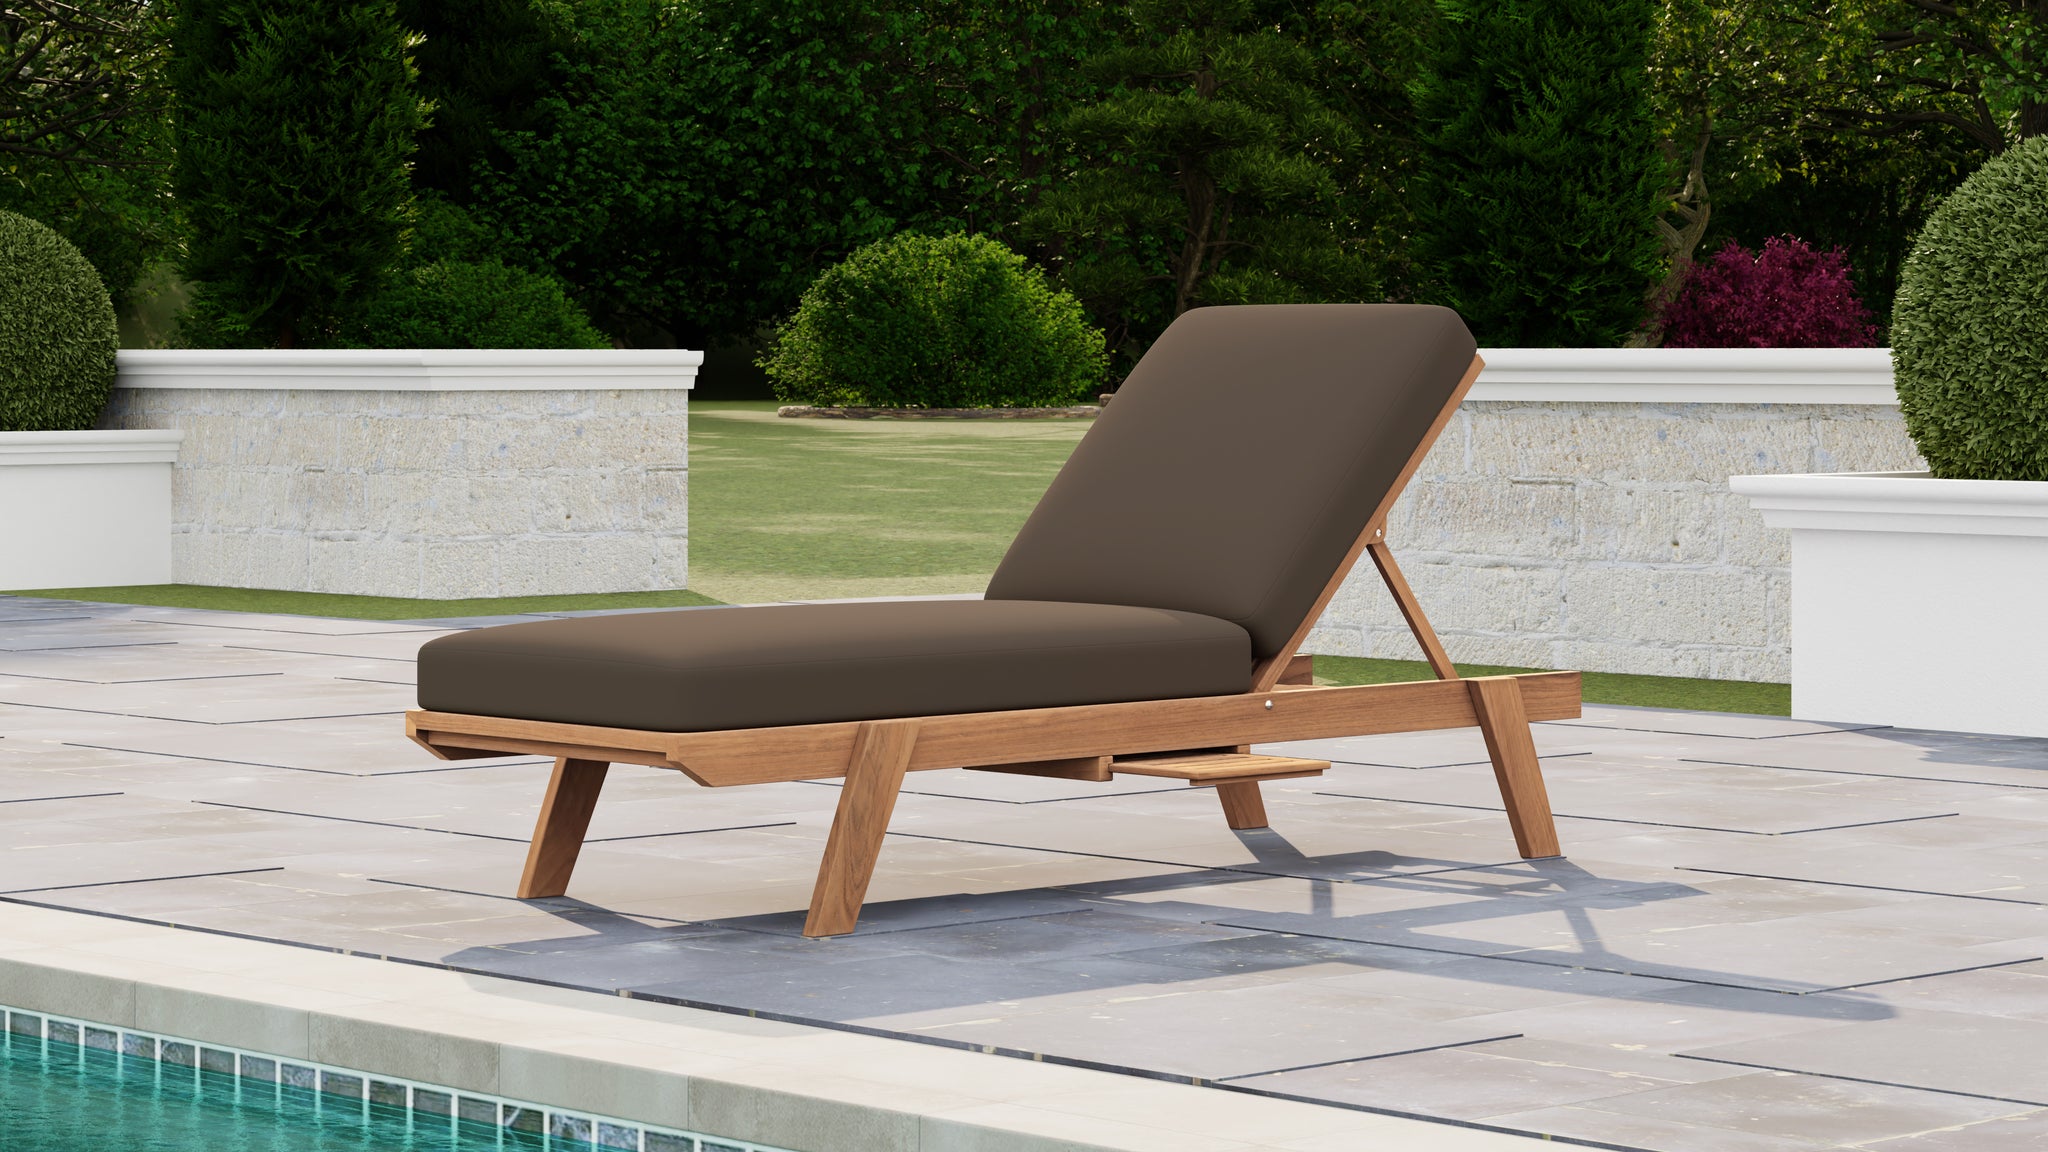 Teak Stacking Lounger with Cushion & Optional Pull Out Tray